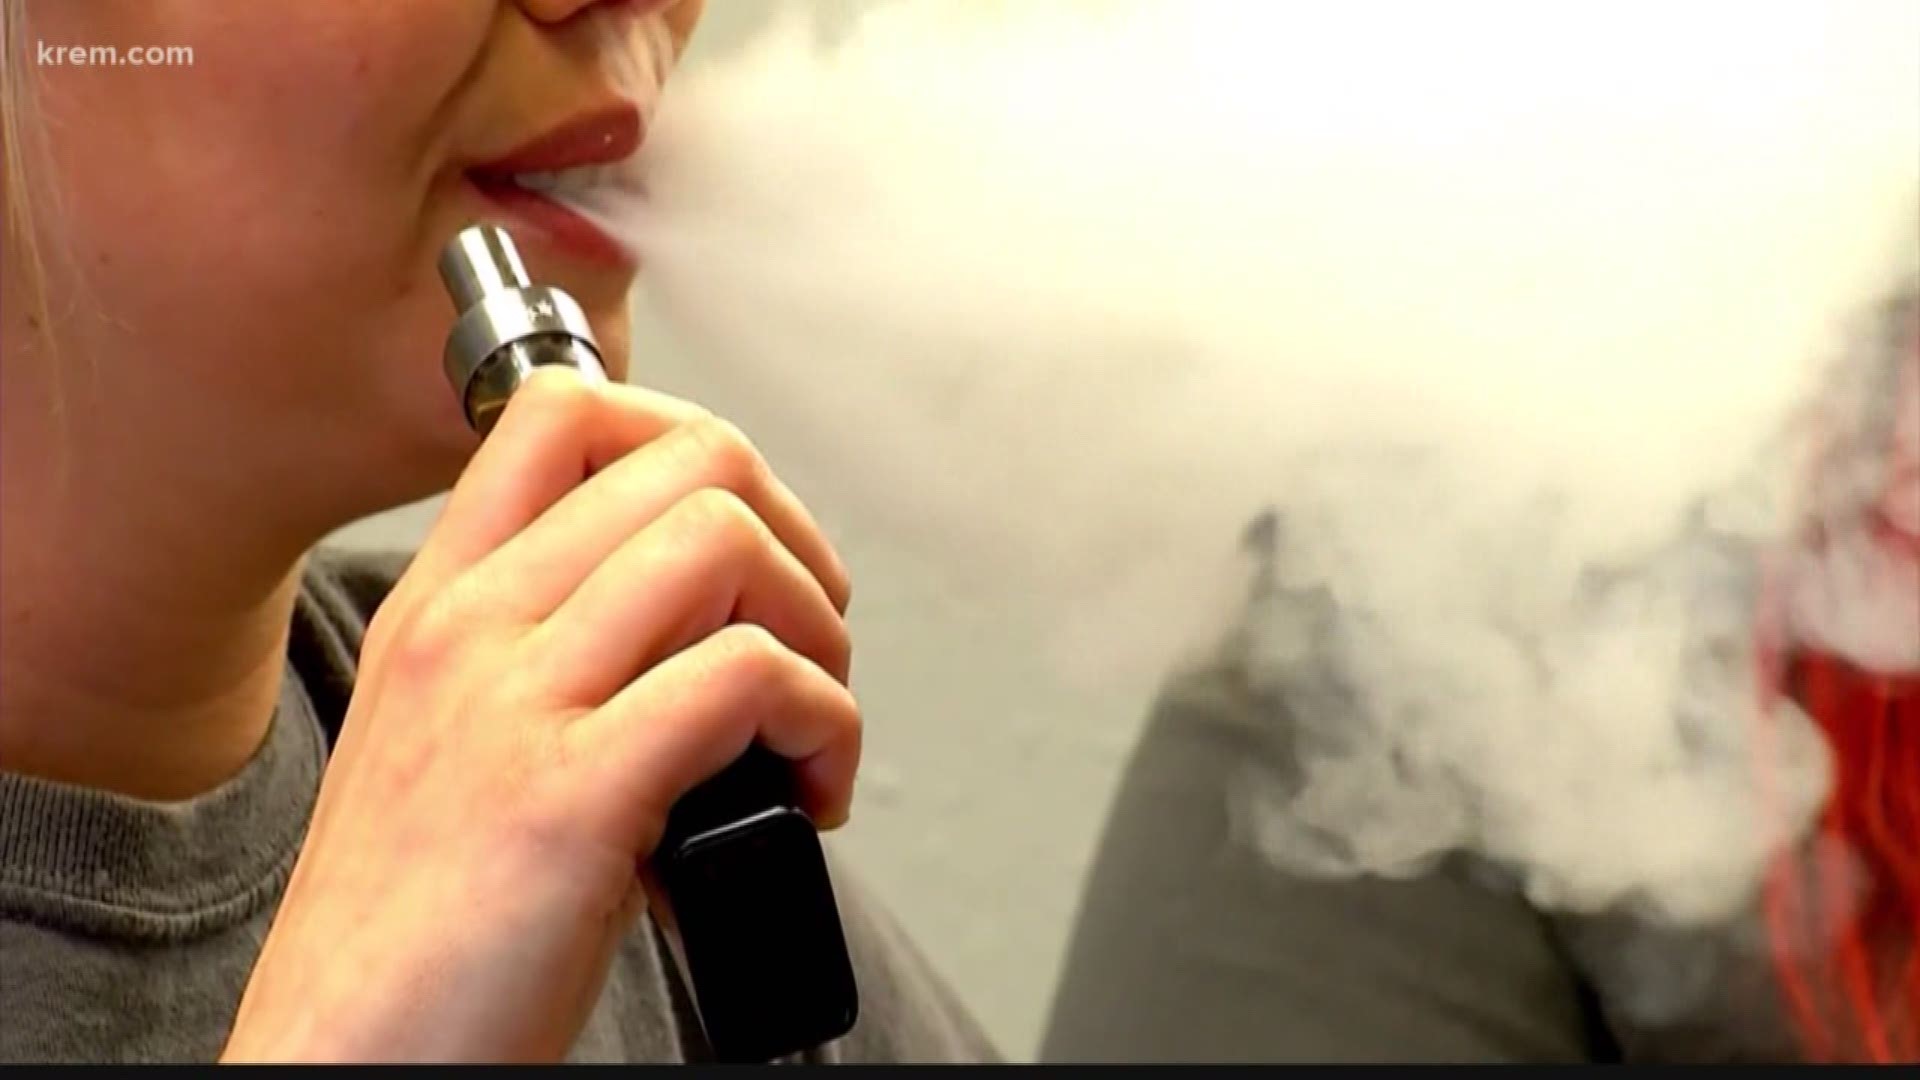 A spokesperson for Spokane Public Schools said the district say 558 incidents of tobacco violations last year, with most of those being vaping devices.  KREM's Danamarie McNicholl breaks down those numbers and what the district is doing to combat the problem.